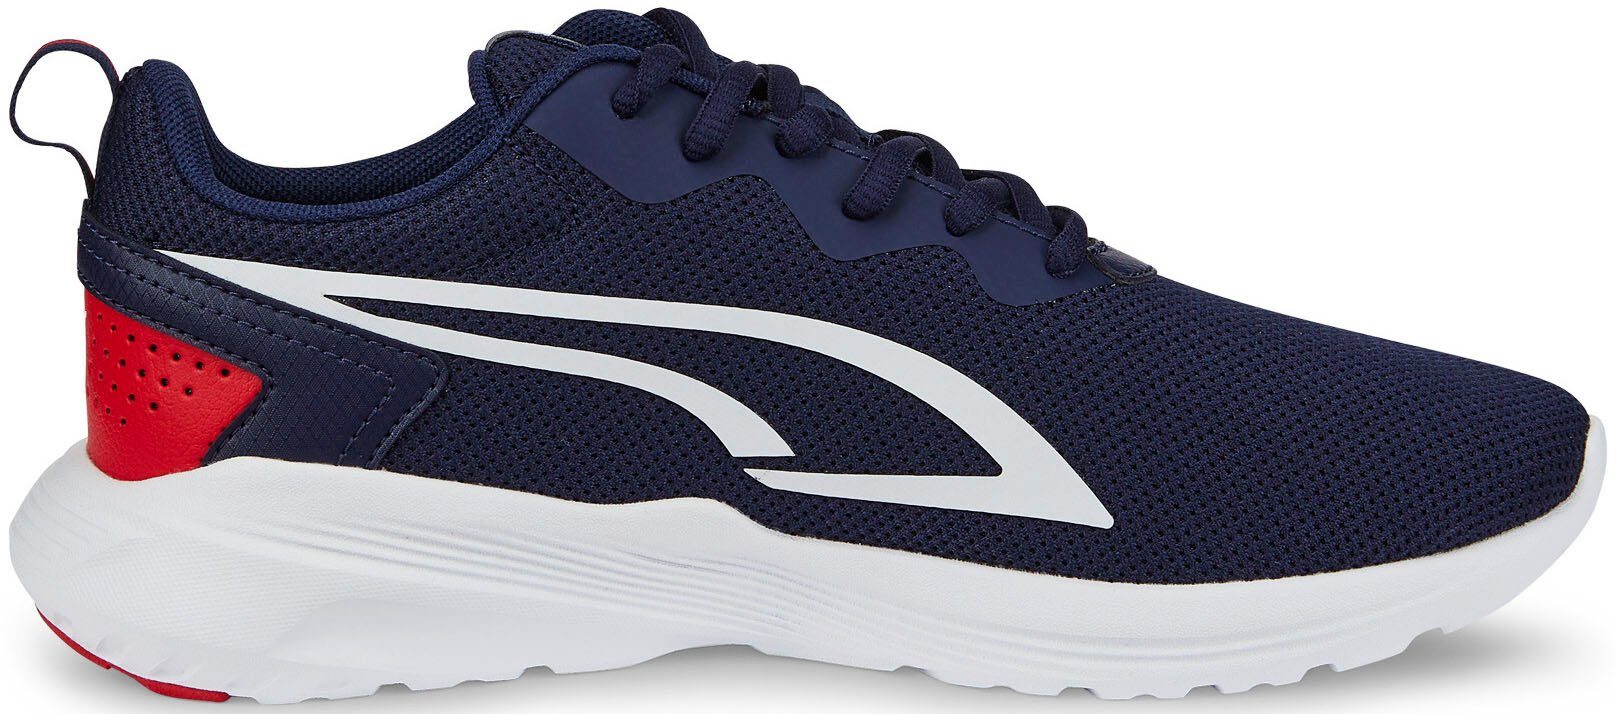 ALL-DAY ACTIVE JR Sneaker PUMA